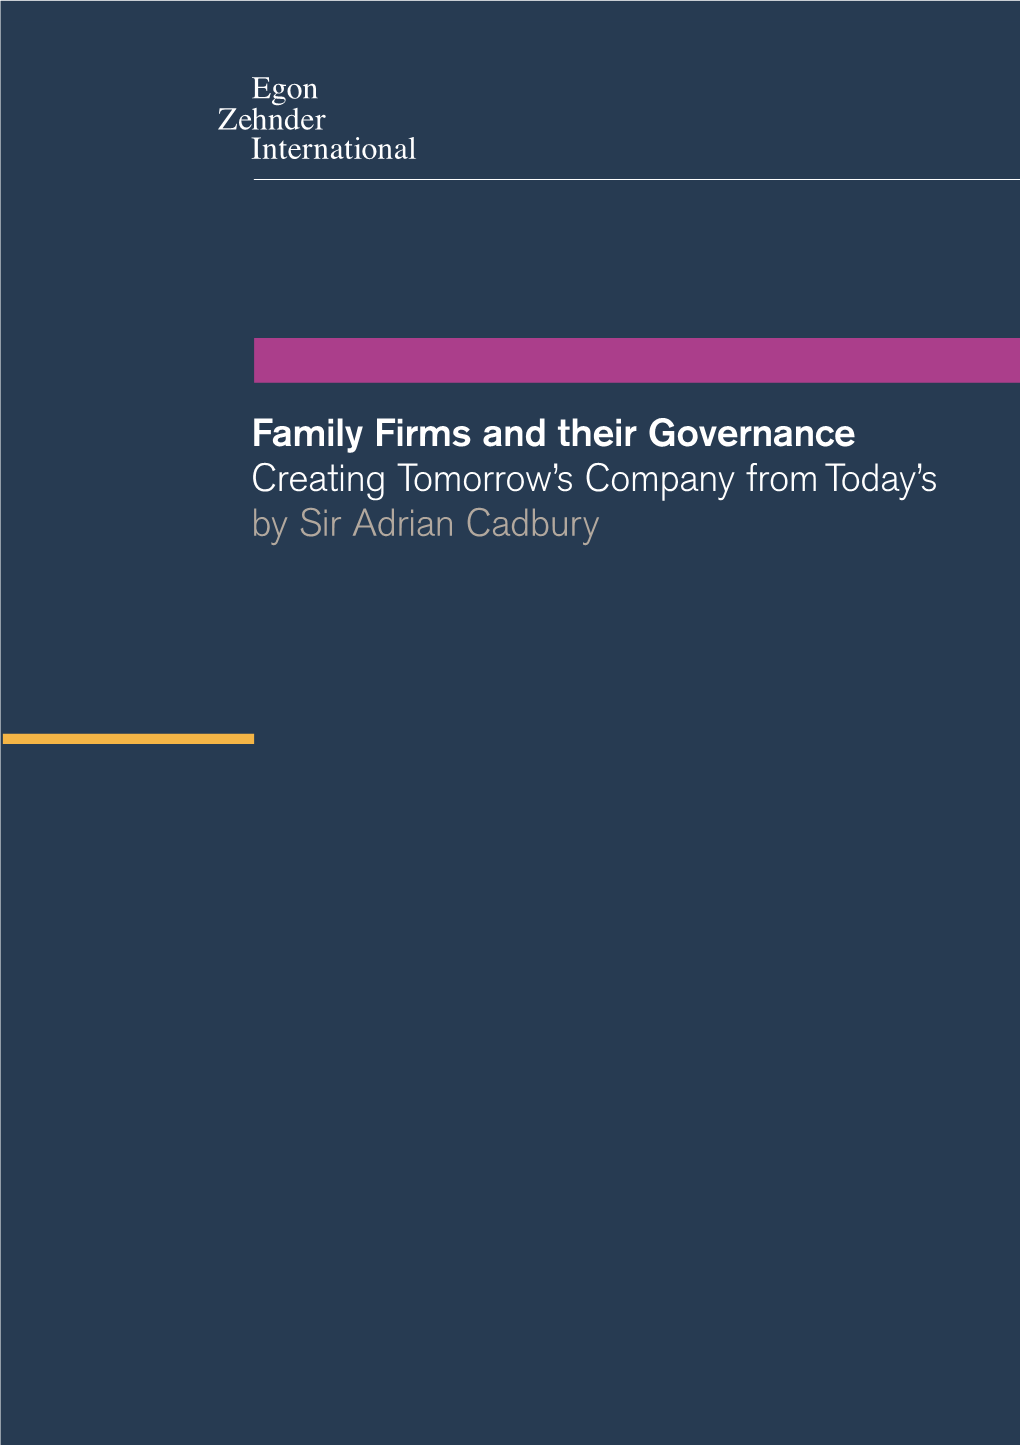 Family Firms and Their Governance: Creating Tomorrow's Company